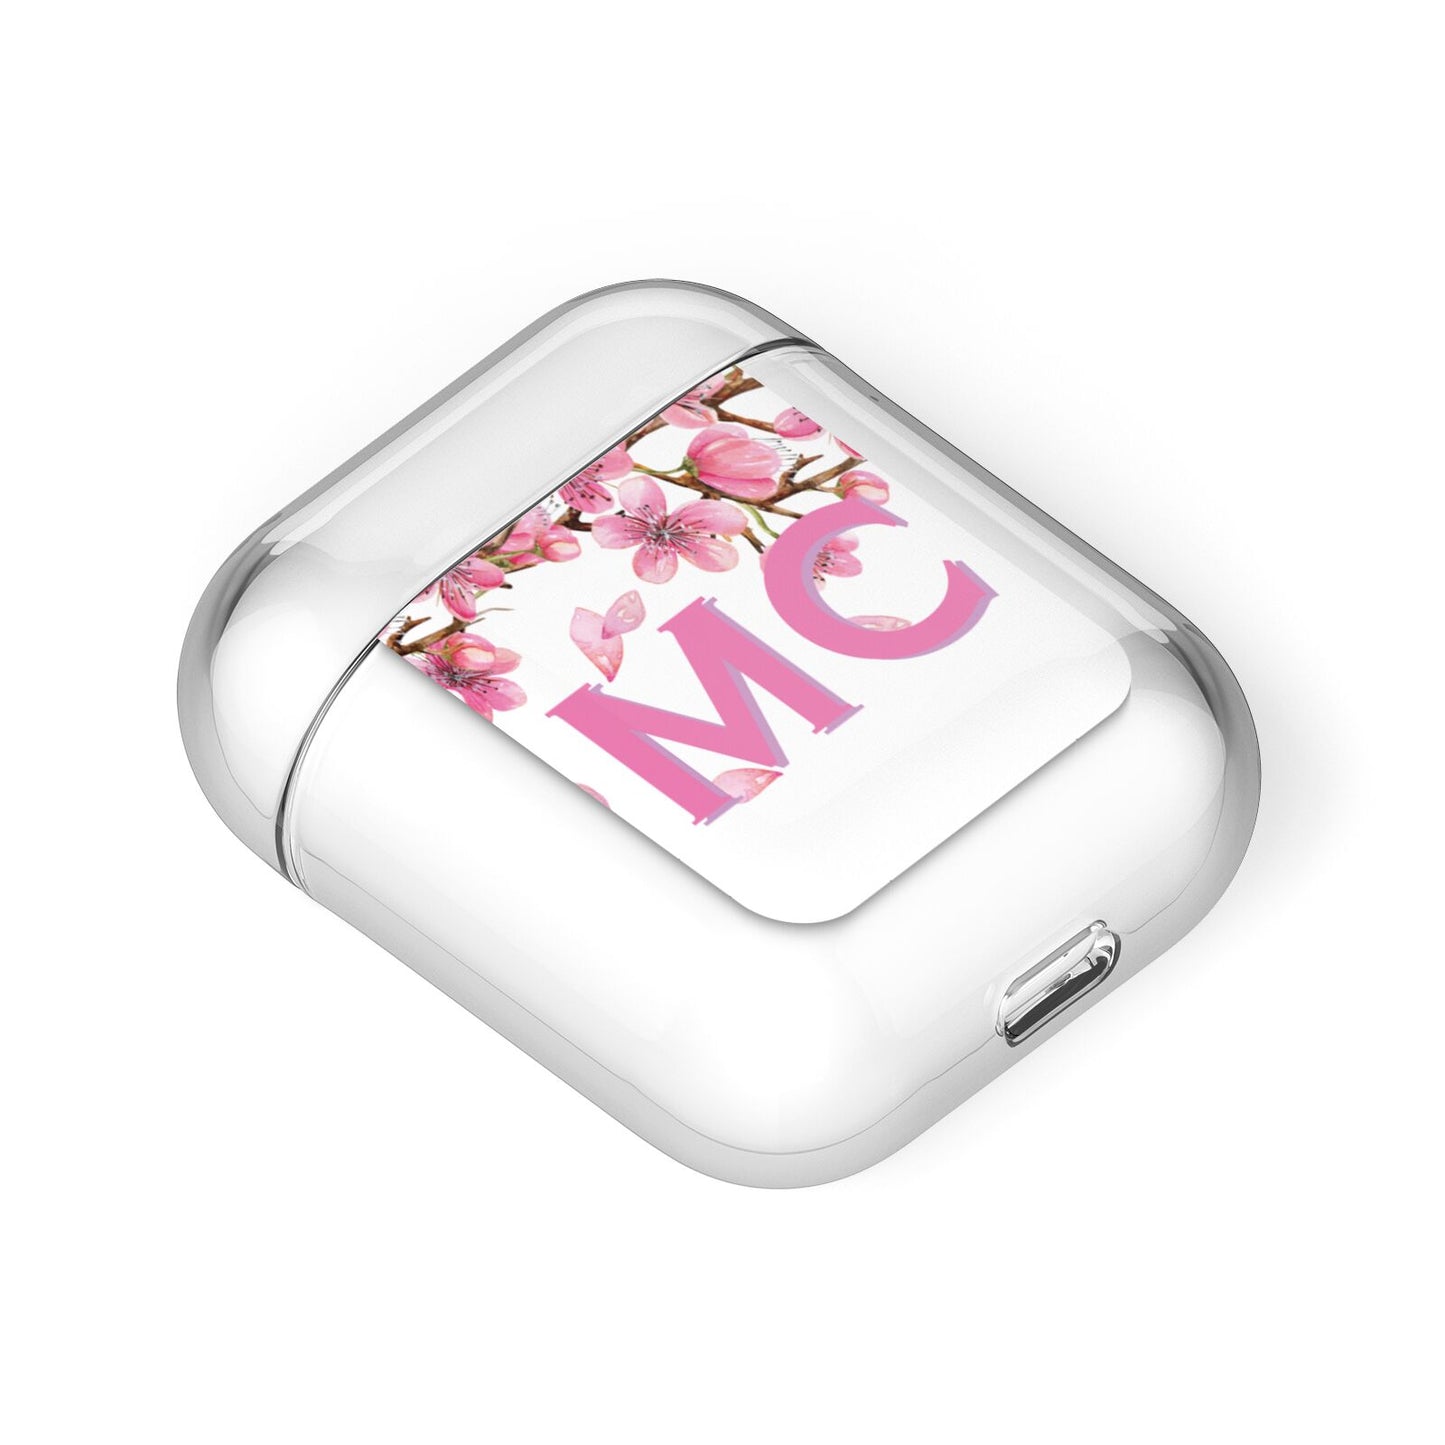 Personalised Pink White Blossom AirPods Case Laid Flat